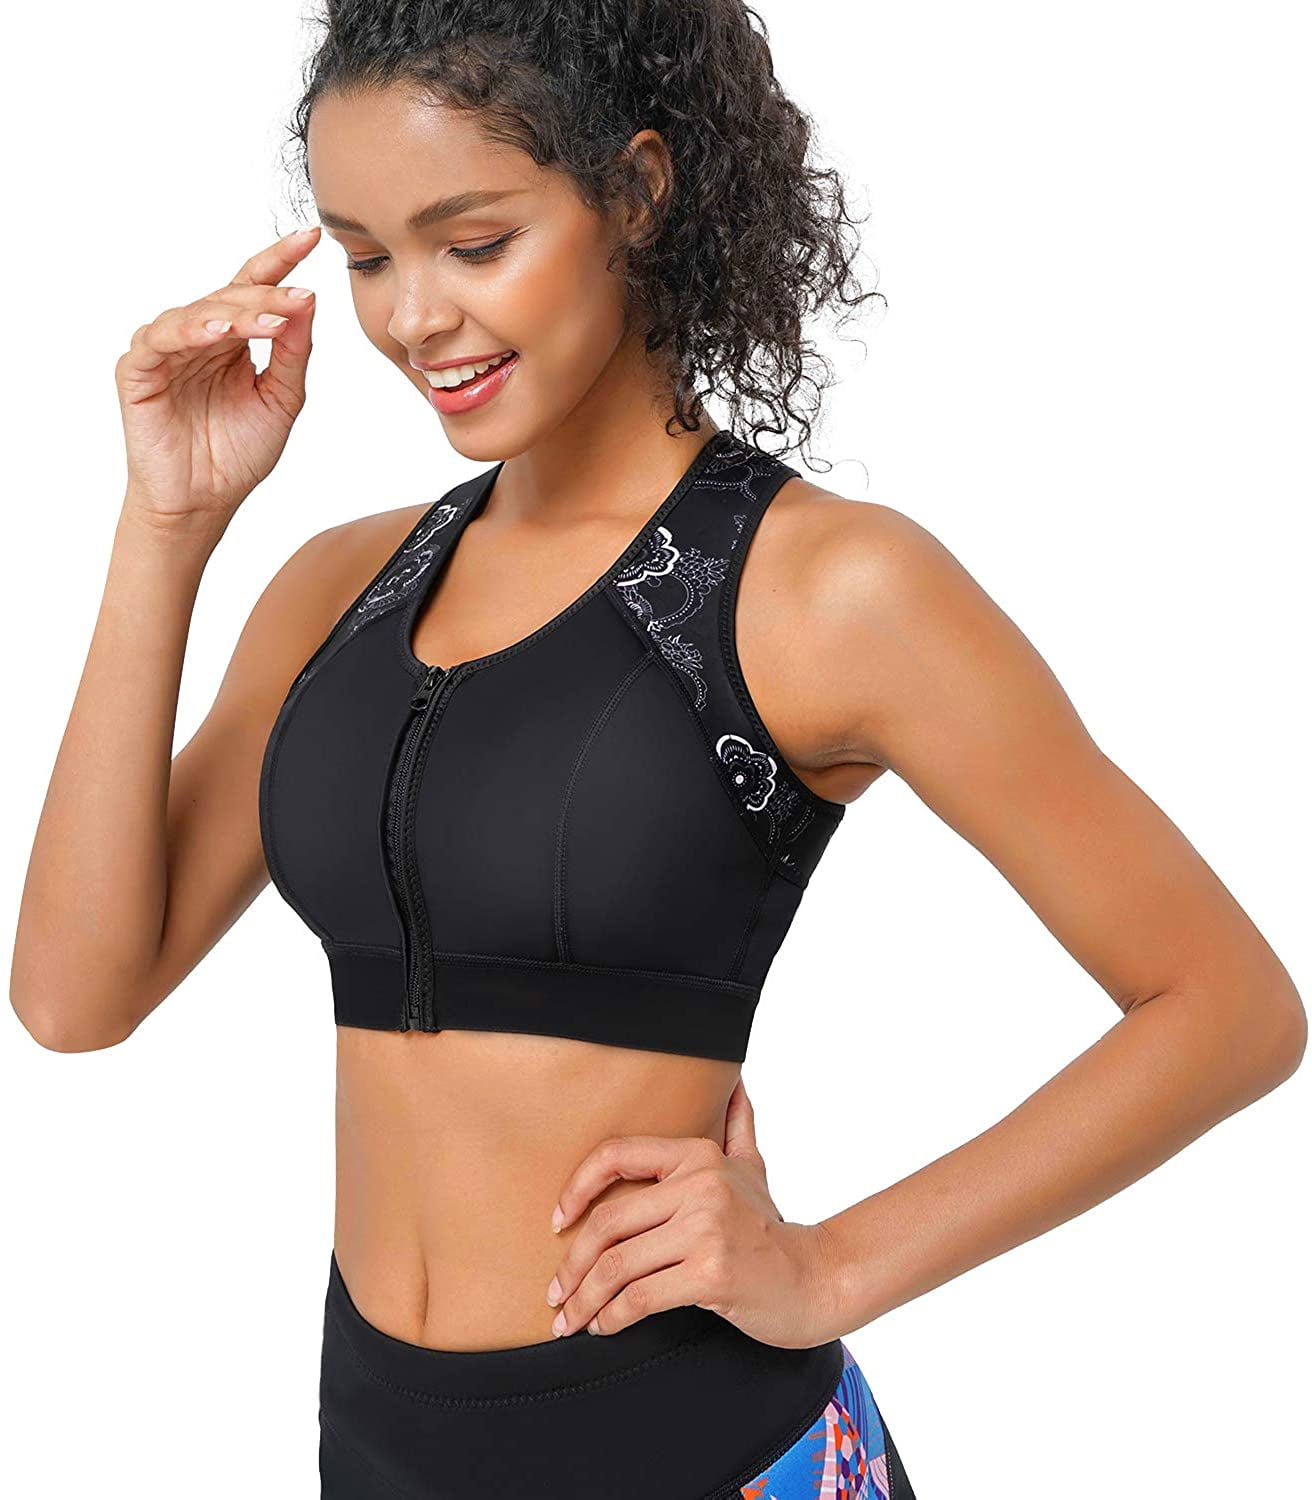 Details about   Women Zip Front Sports Bra High Impact Seamless Workout Yoga Gym Padded Vest Top 